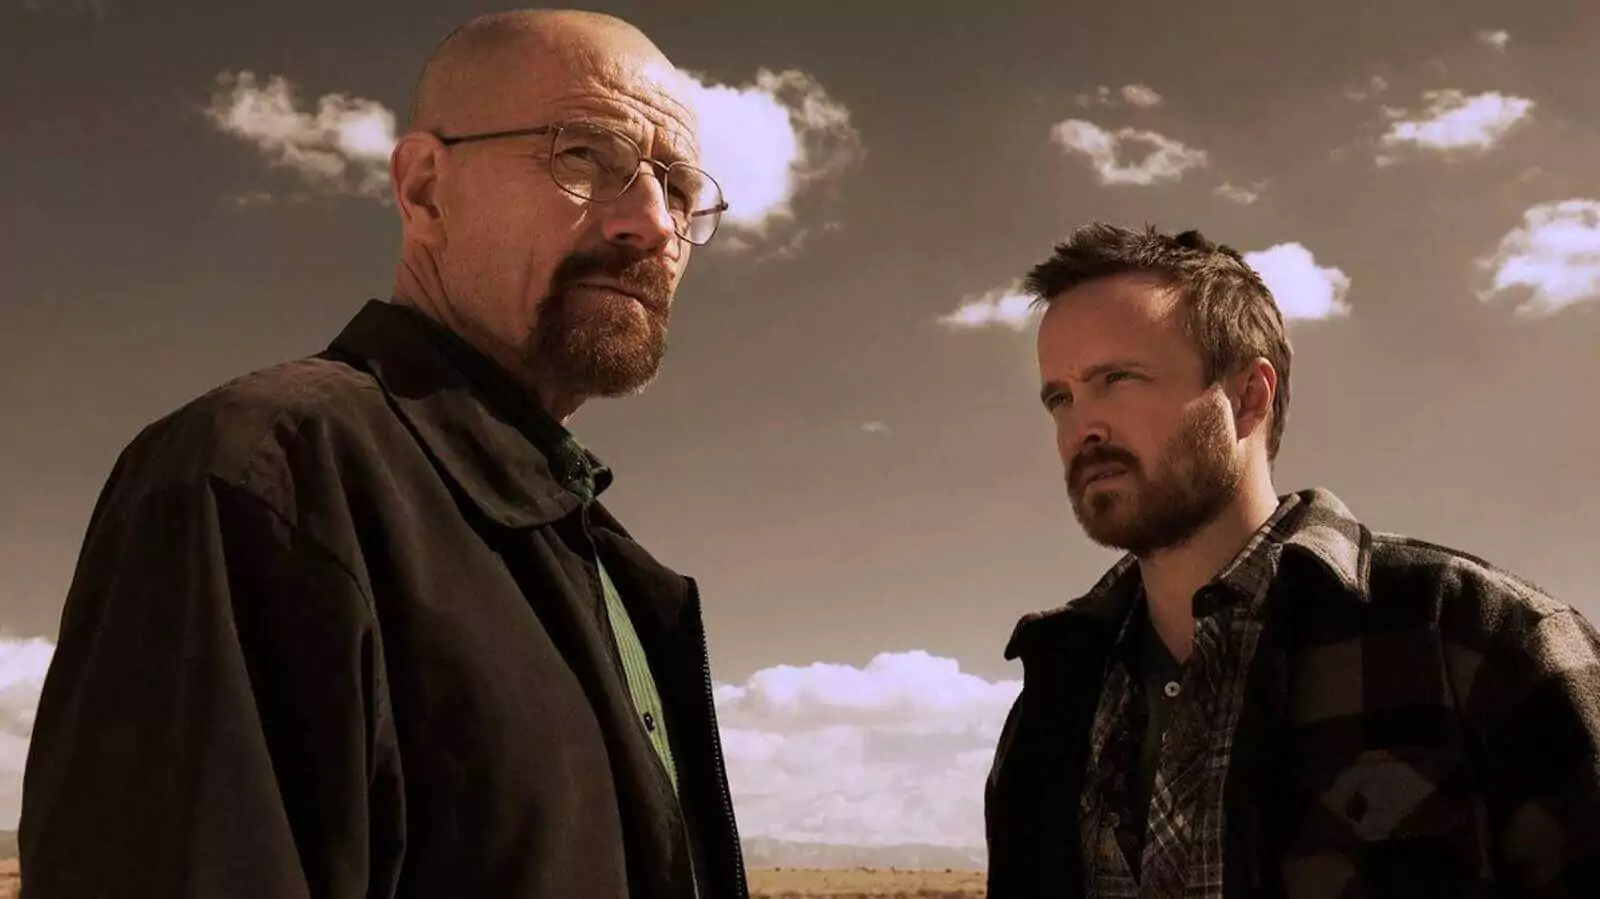 Walter White and Jesse Pinkman from Breaking Bad